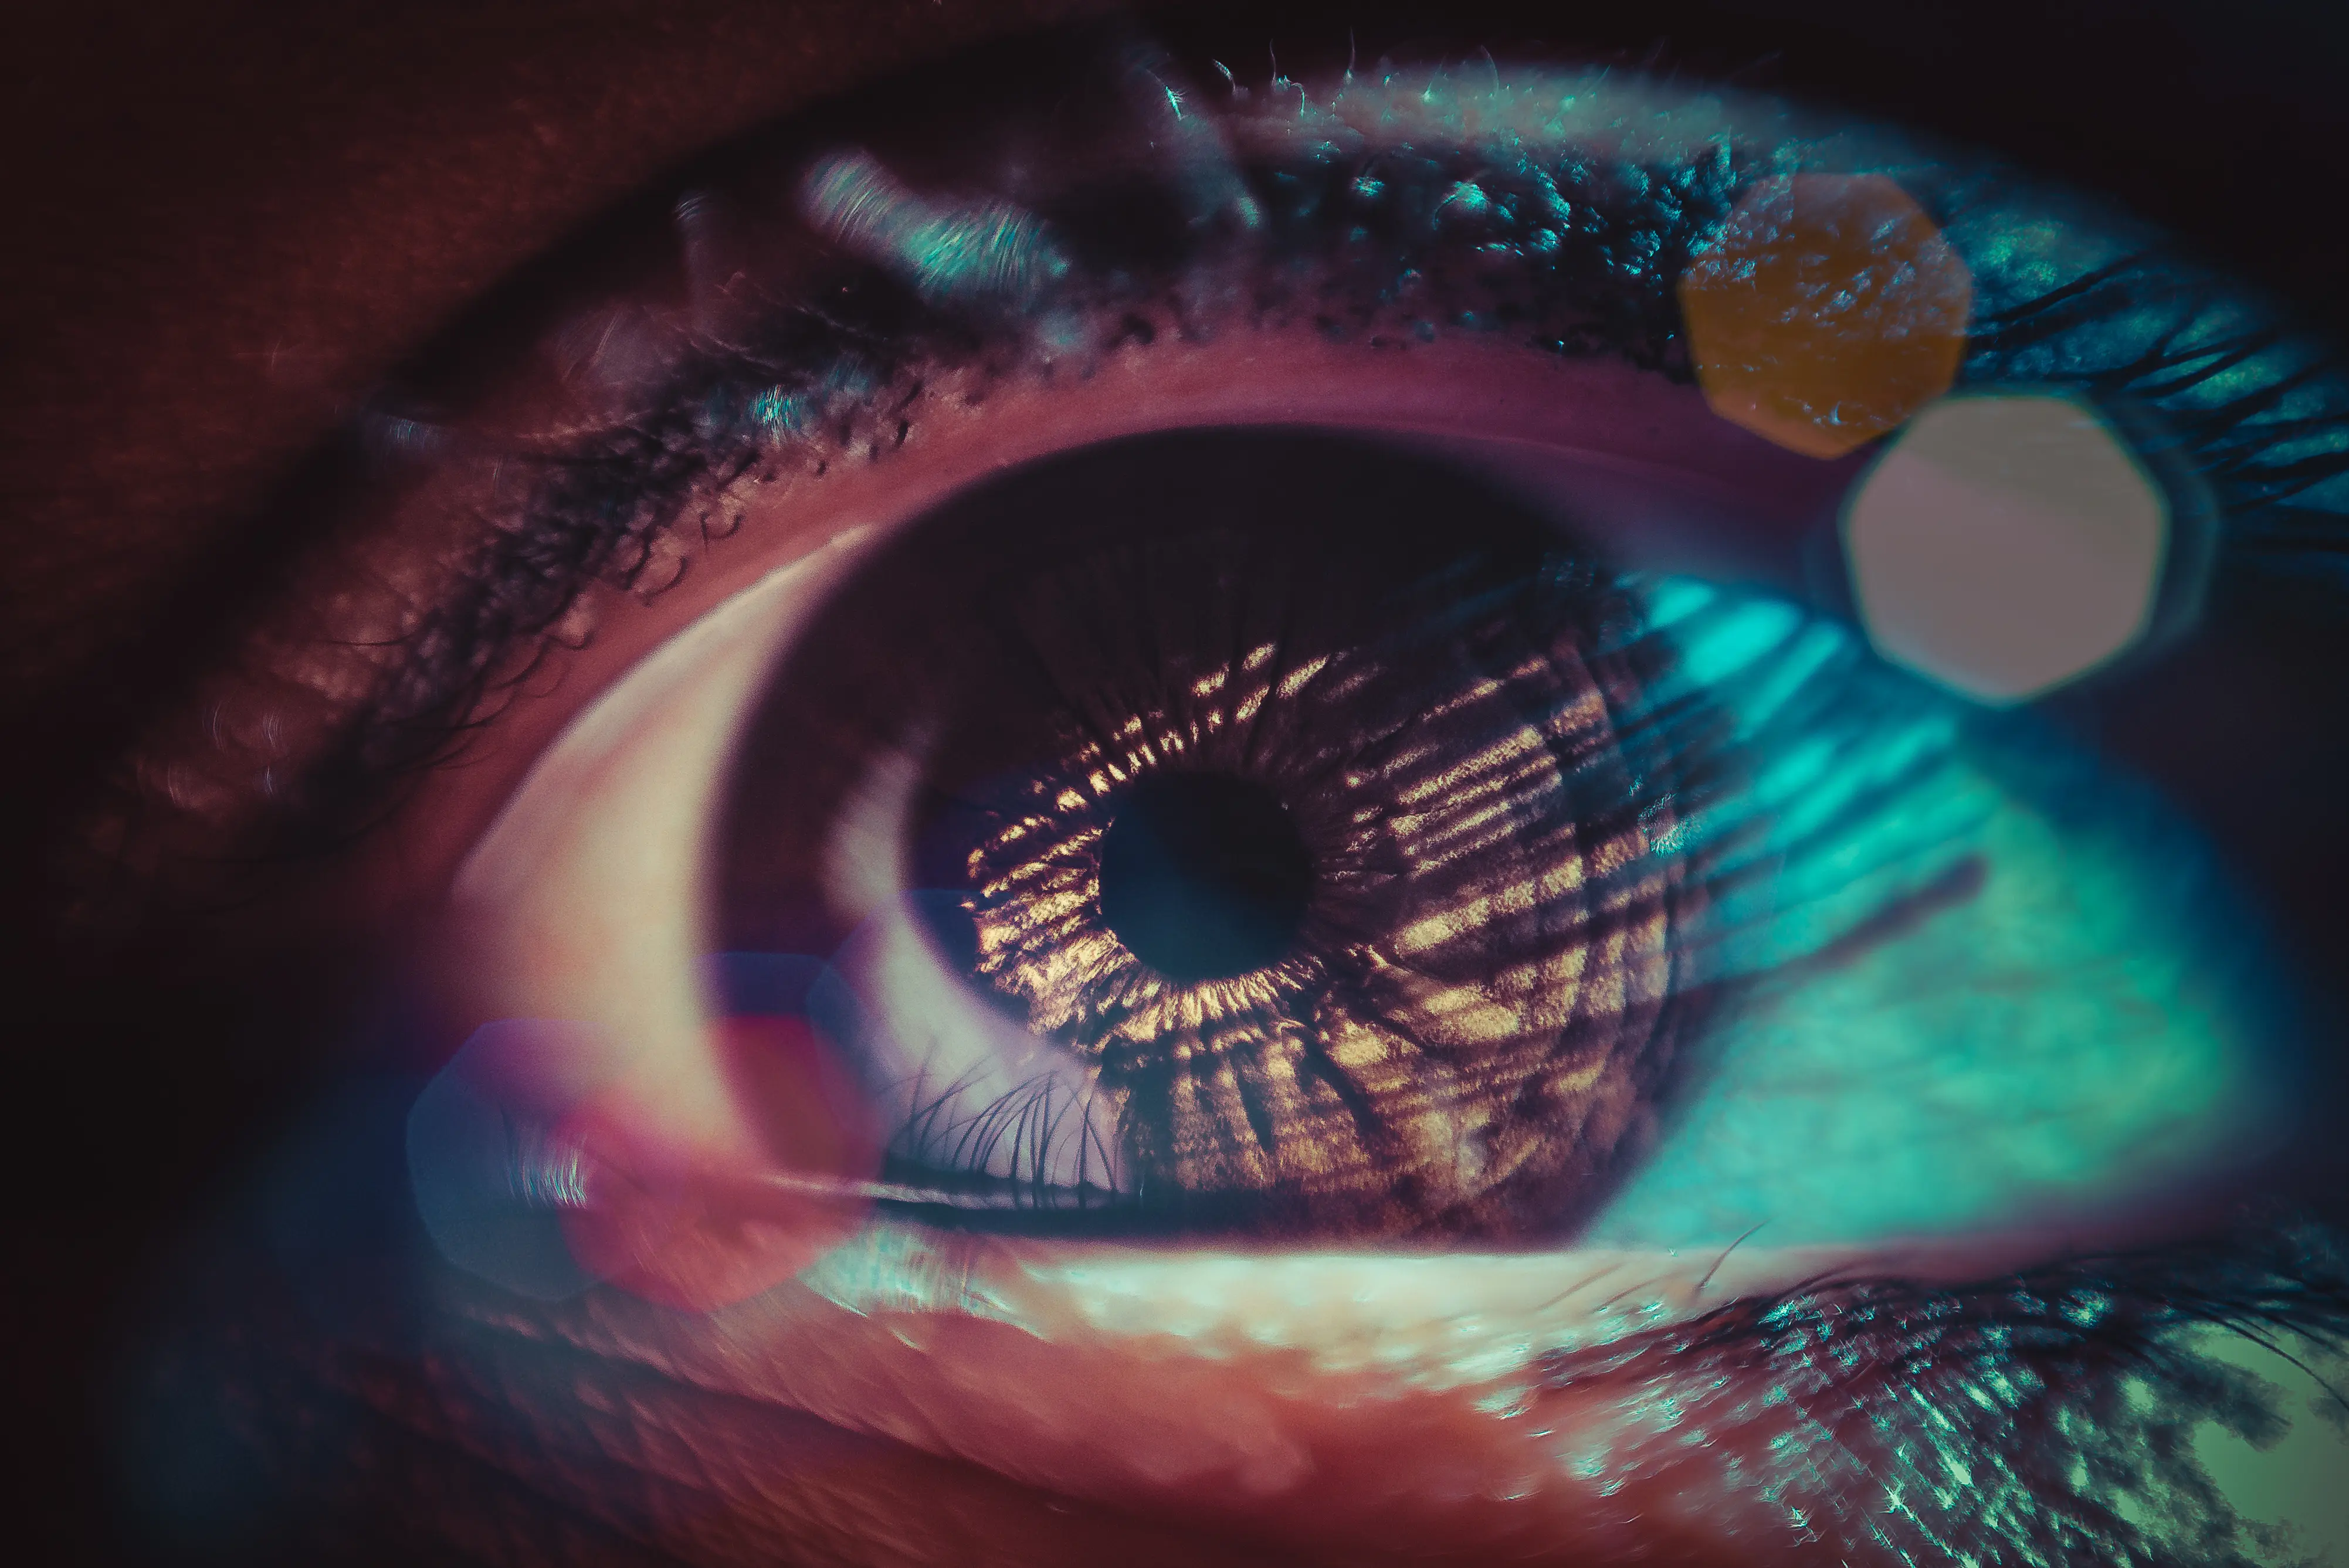 EMDR (Eye Movement Desensitization and Reprocessing) is a type of therapy that allows people to heal from the symptoms associated with trauma.